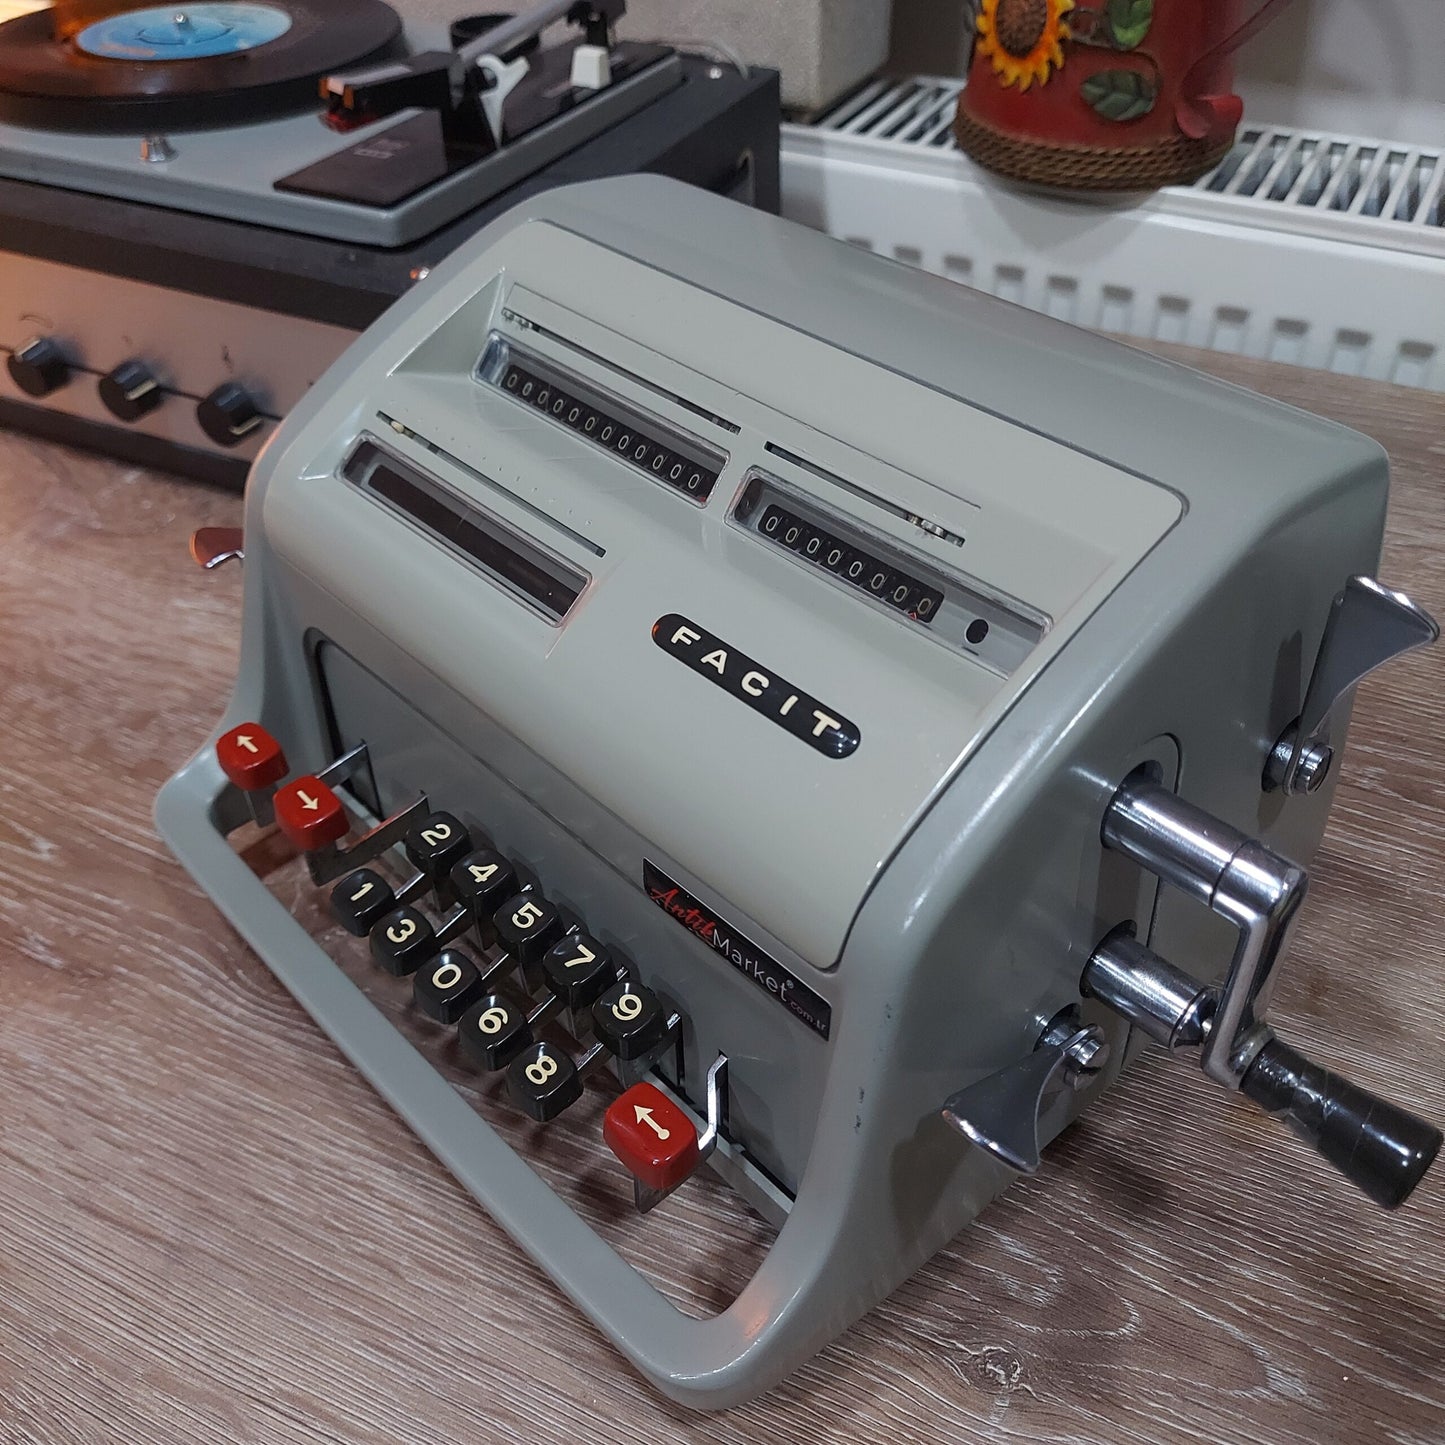 65 years old Facit Antique Mechanical Calculator